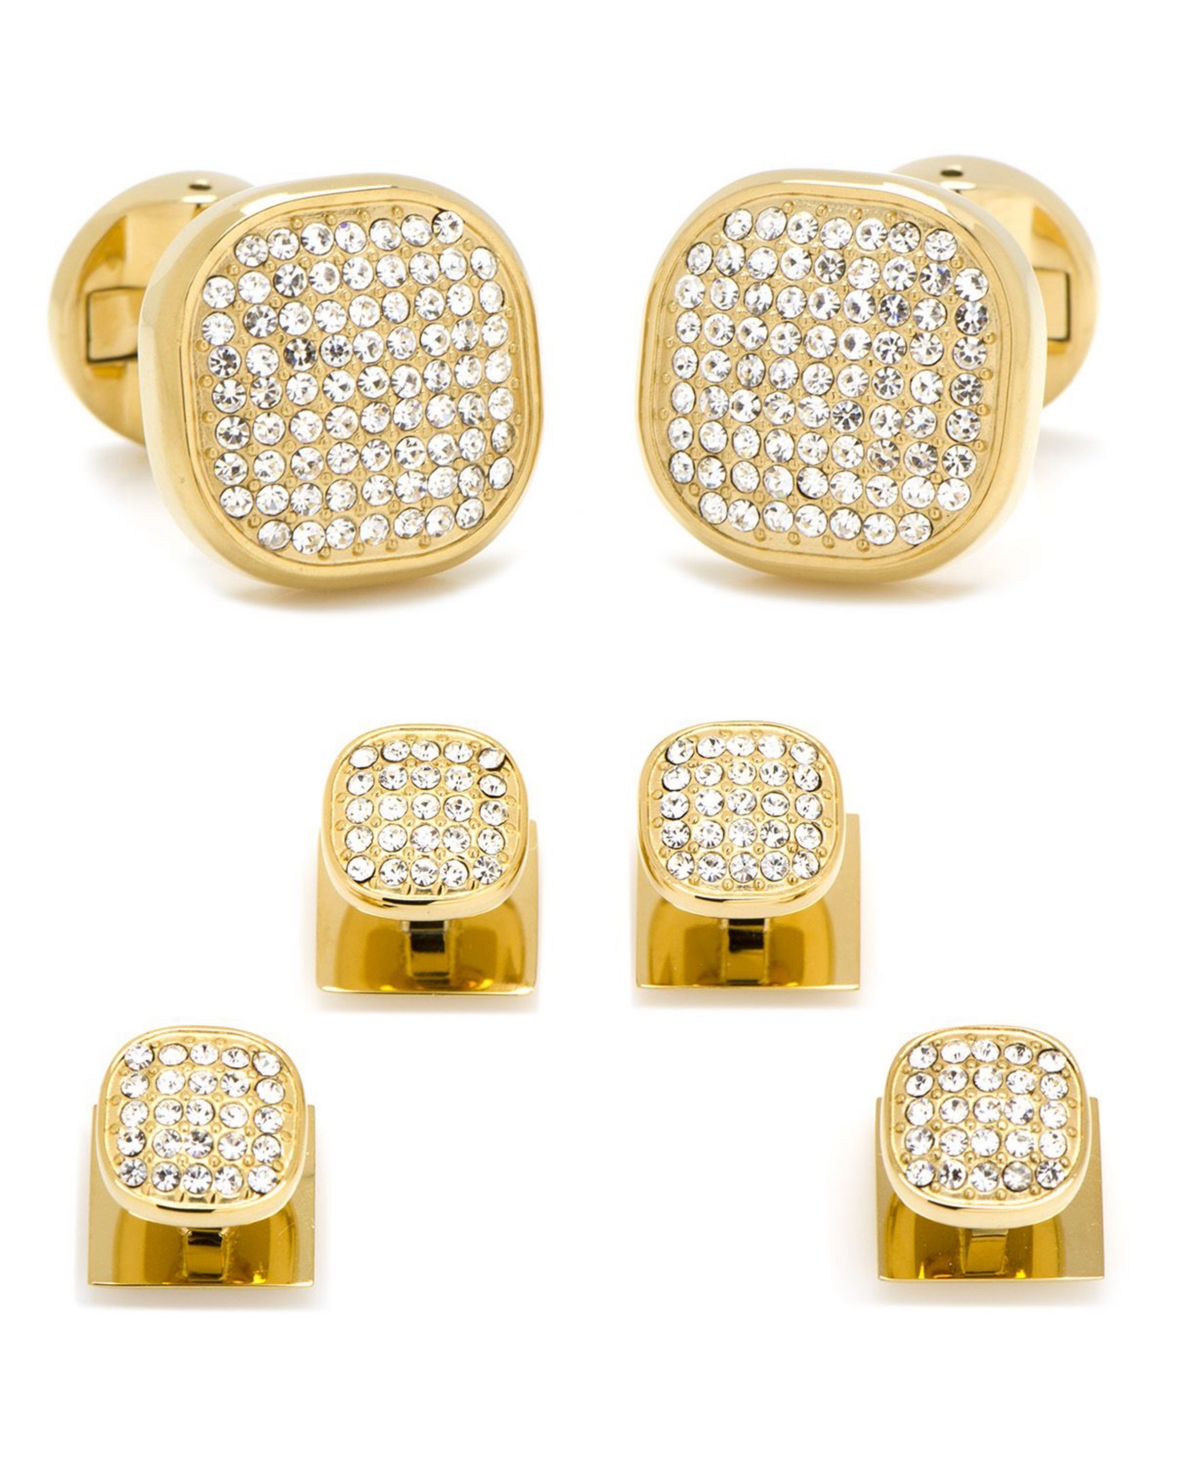 Men's Pave Cufflink and Stud Set - Gold-Tone